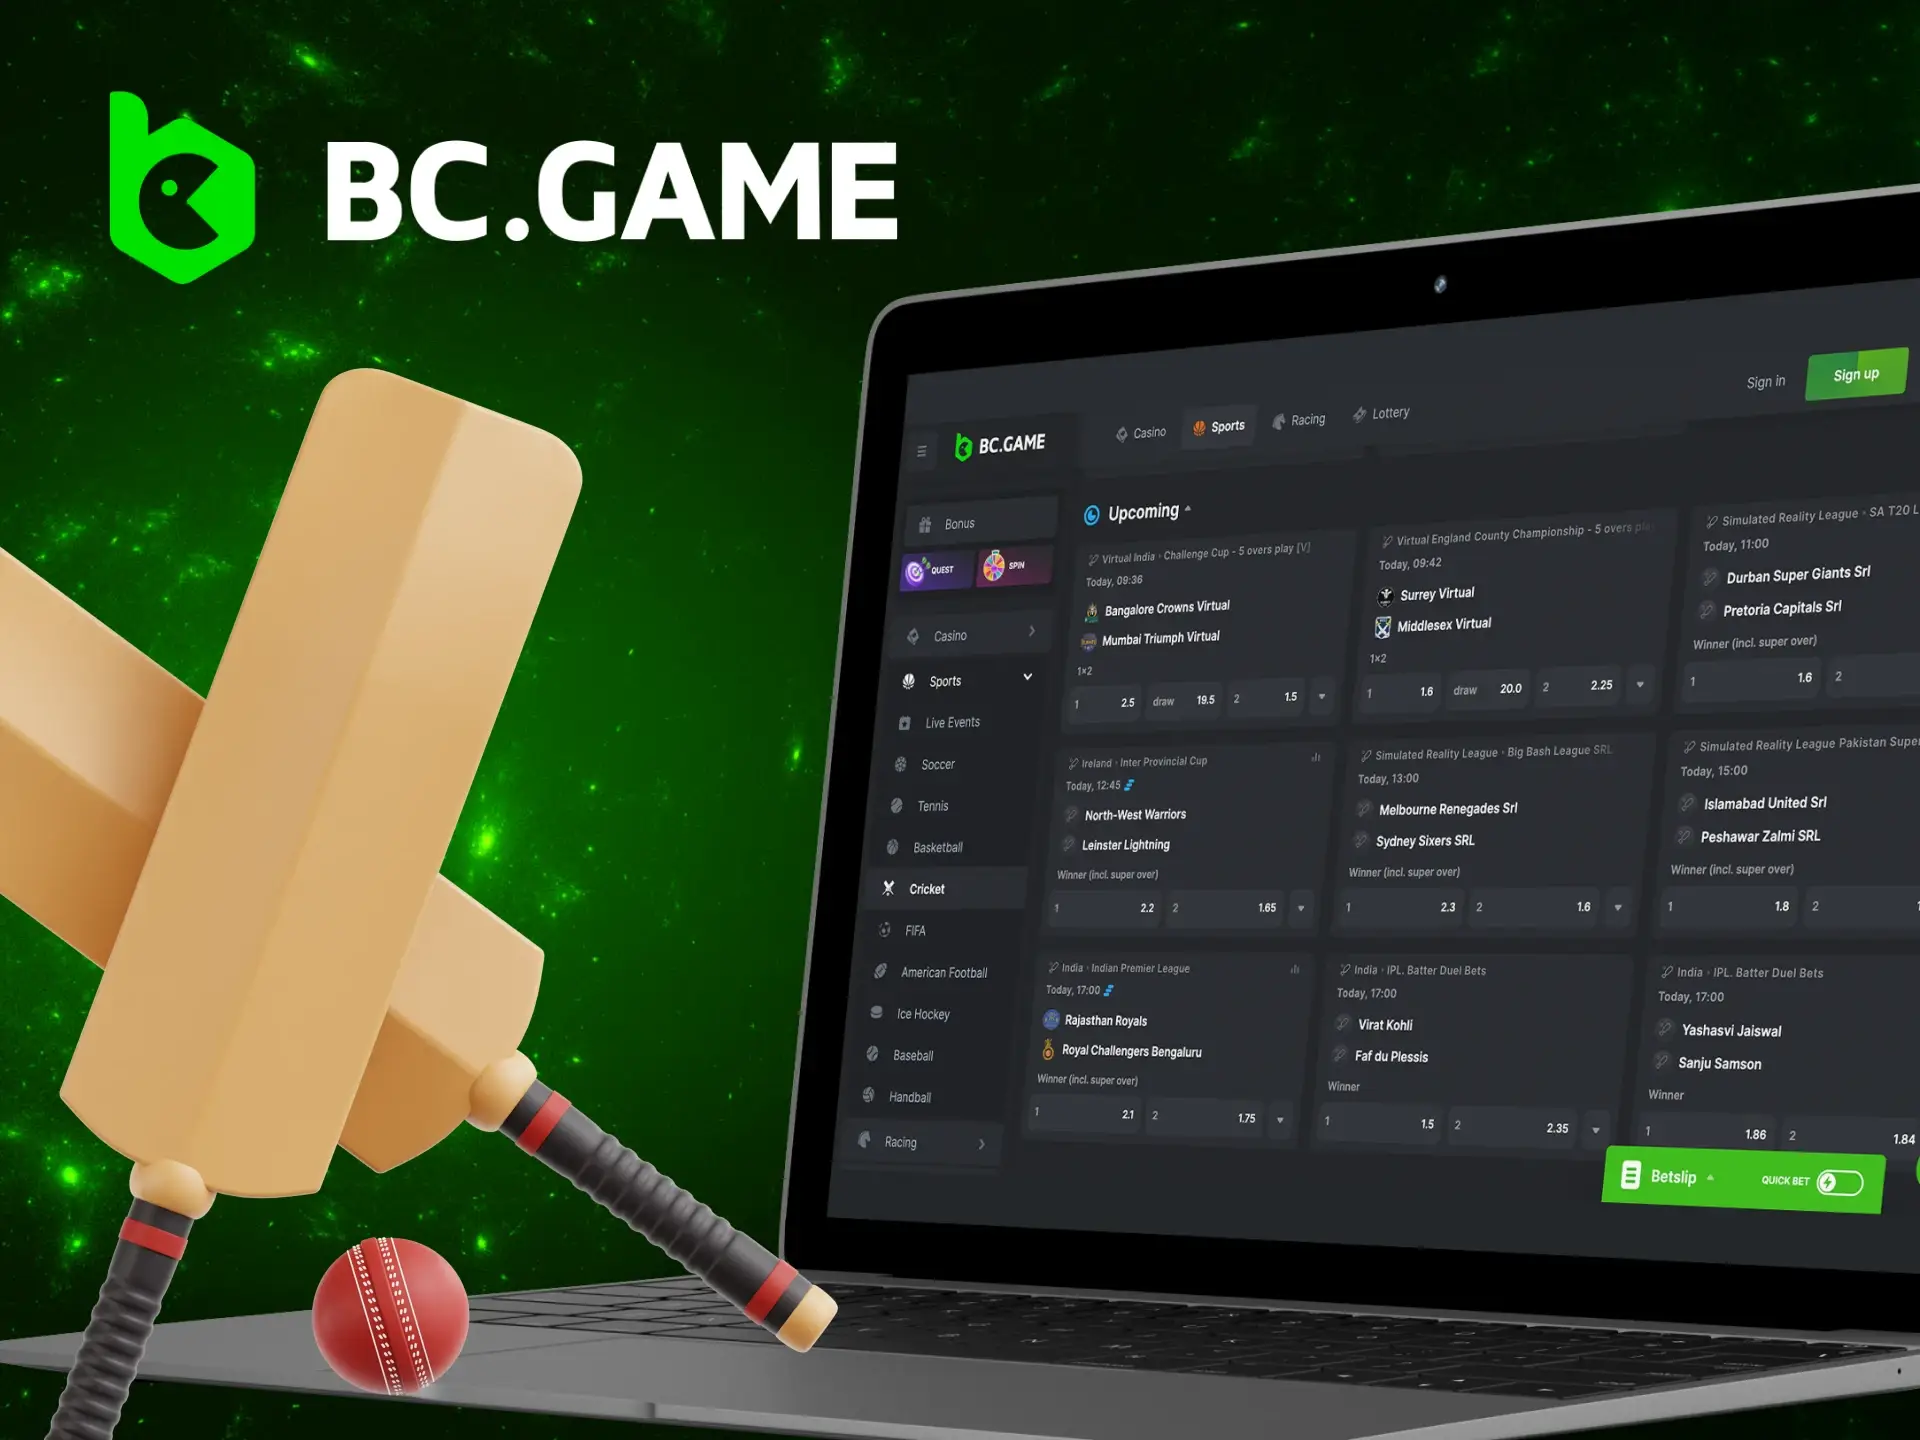 What cricket tournaments can you bet on at the BC Game online casino.